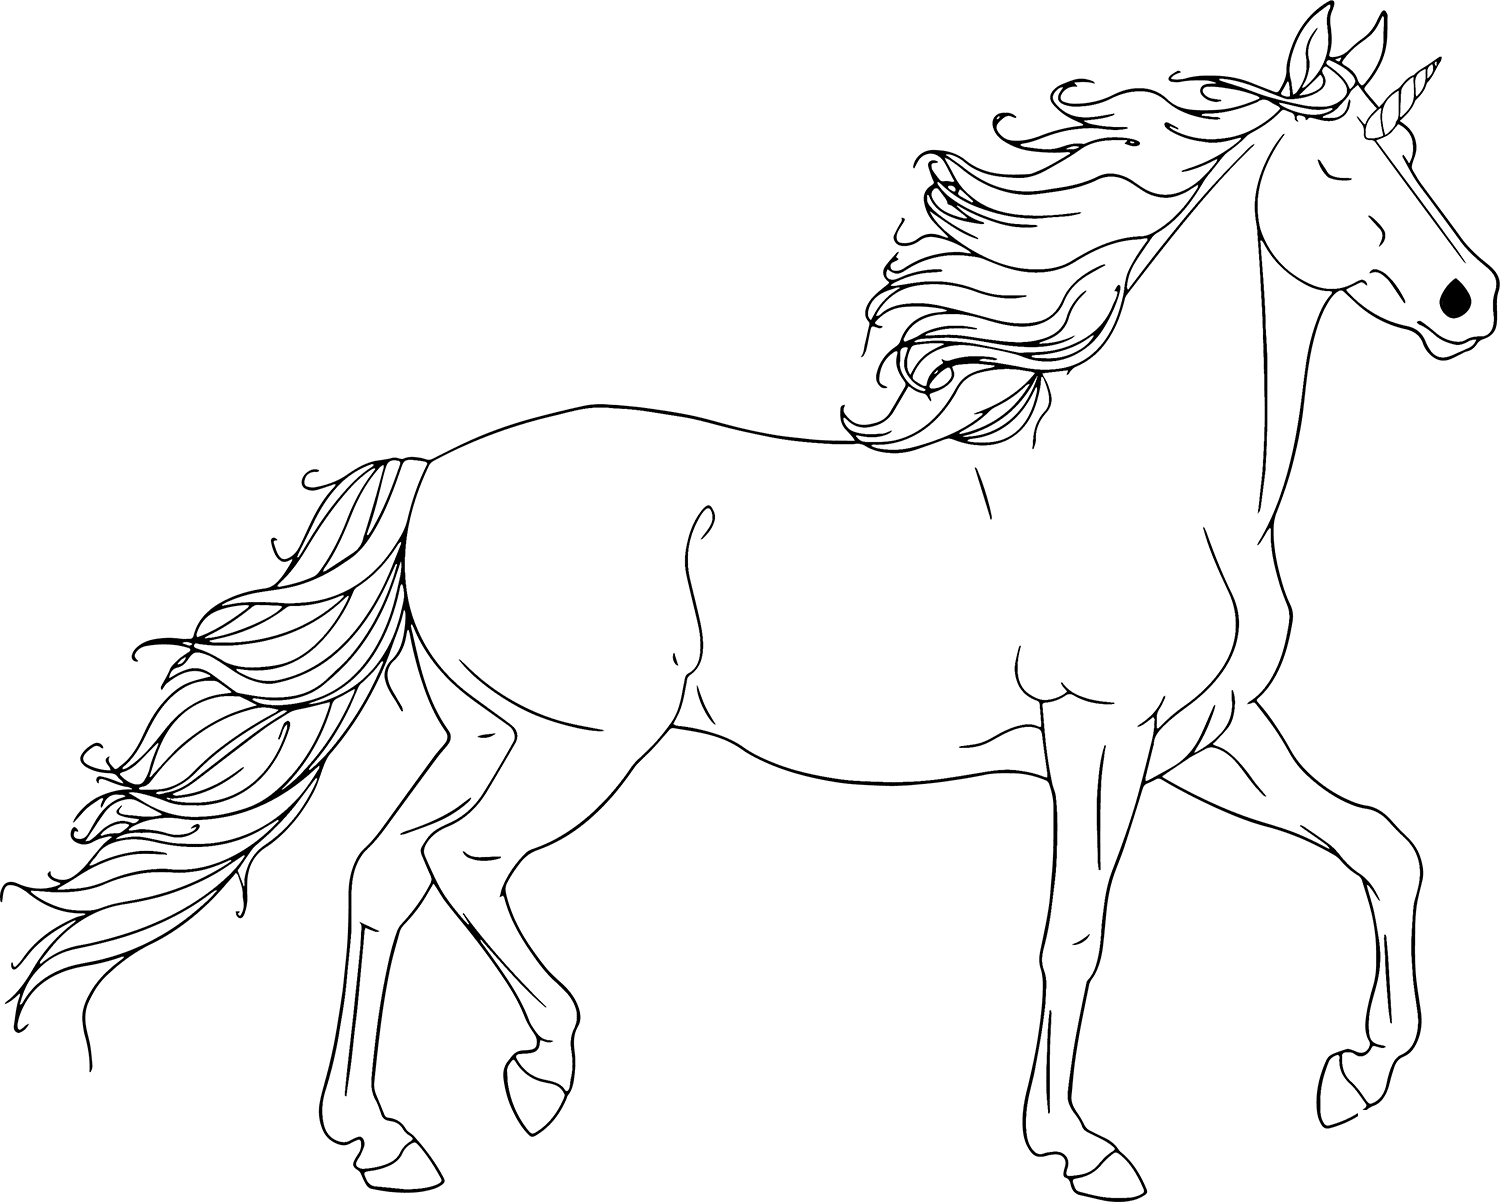 Cultivated Unicorn Coloring Page